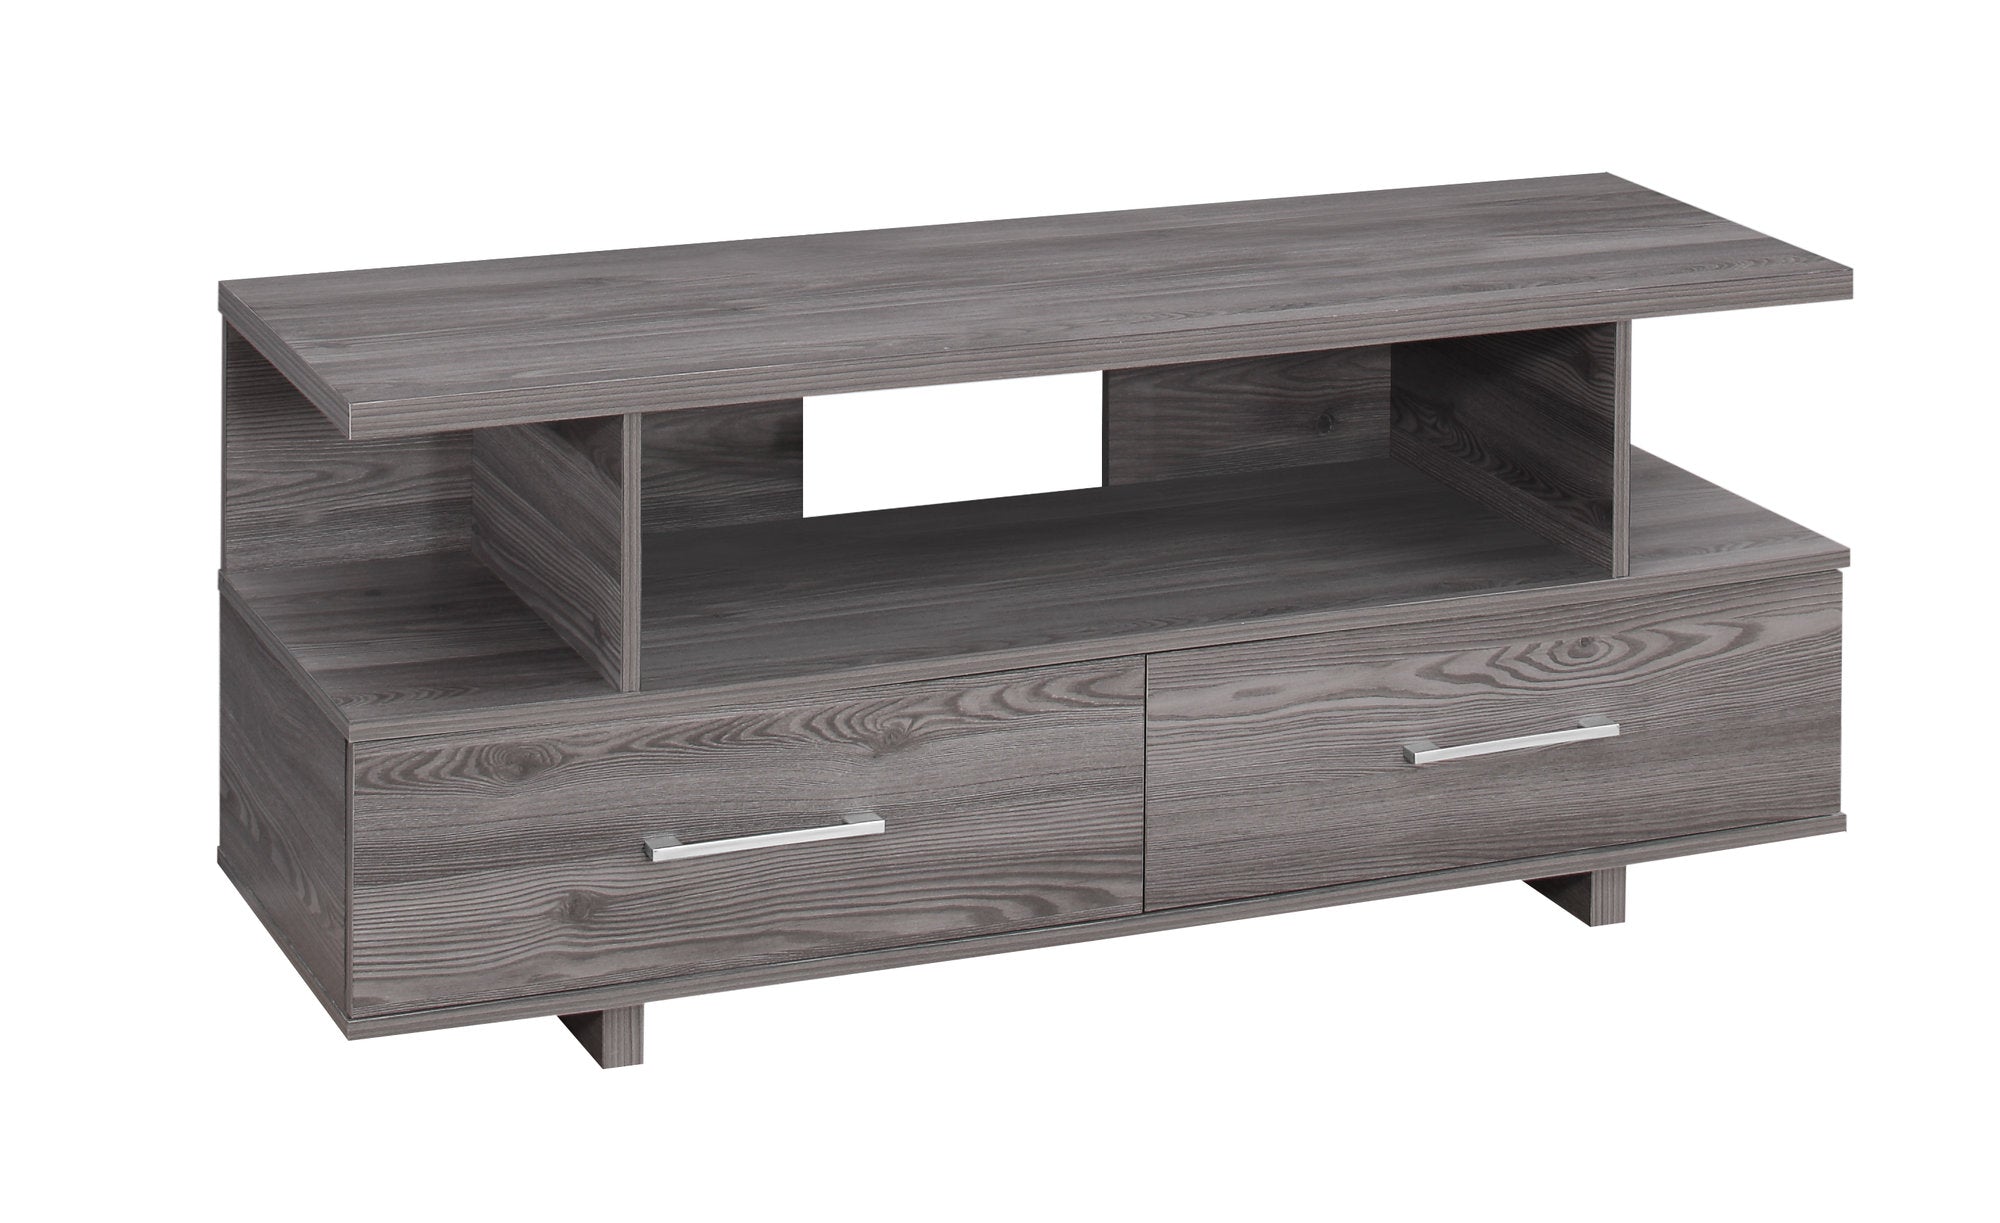 MN-782608    Tv Stand, 48 Inch, Console, Media Entertainment Center, Storage Cabinet, Living Room, Bedroom, Laminate, Grey, Contemporary, Modern